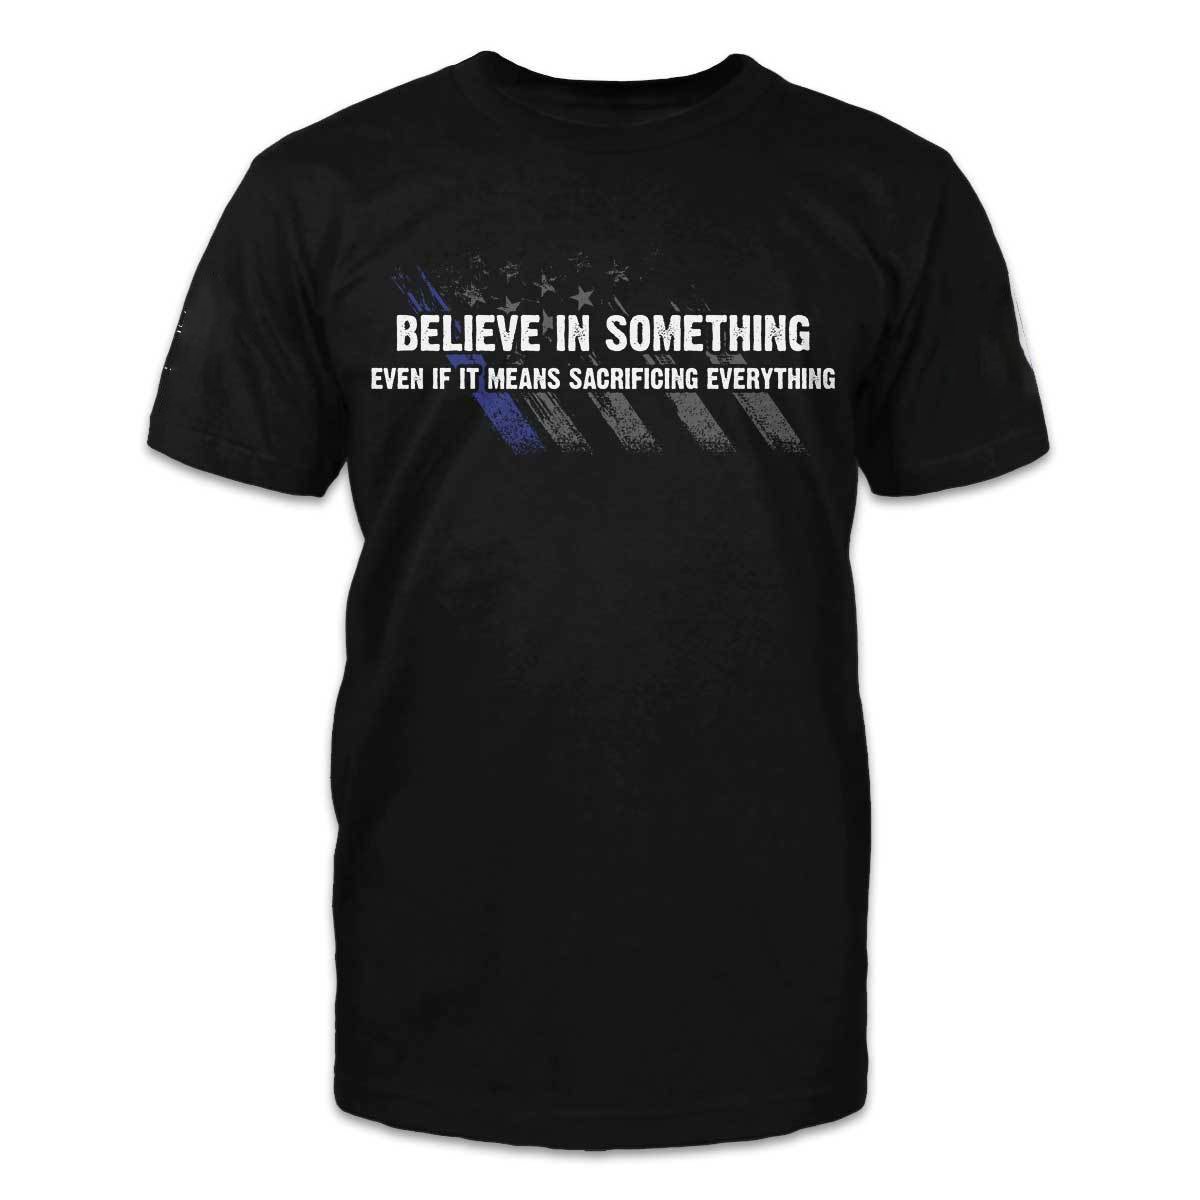 Veteran Shirt, Believe In Something, Even If It Means Sacrificing Everything T-Shirt KM3006